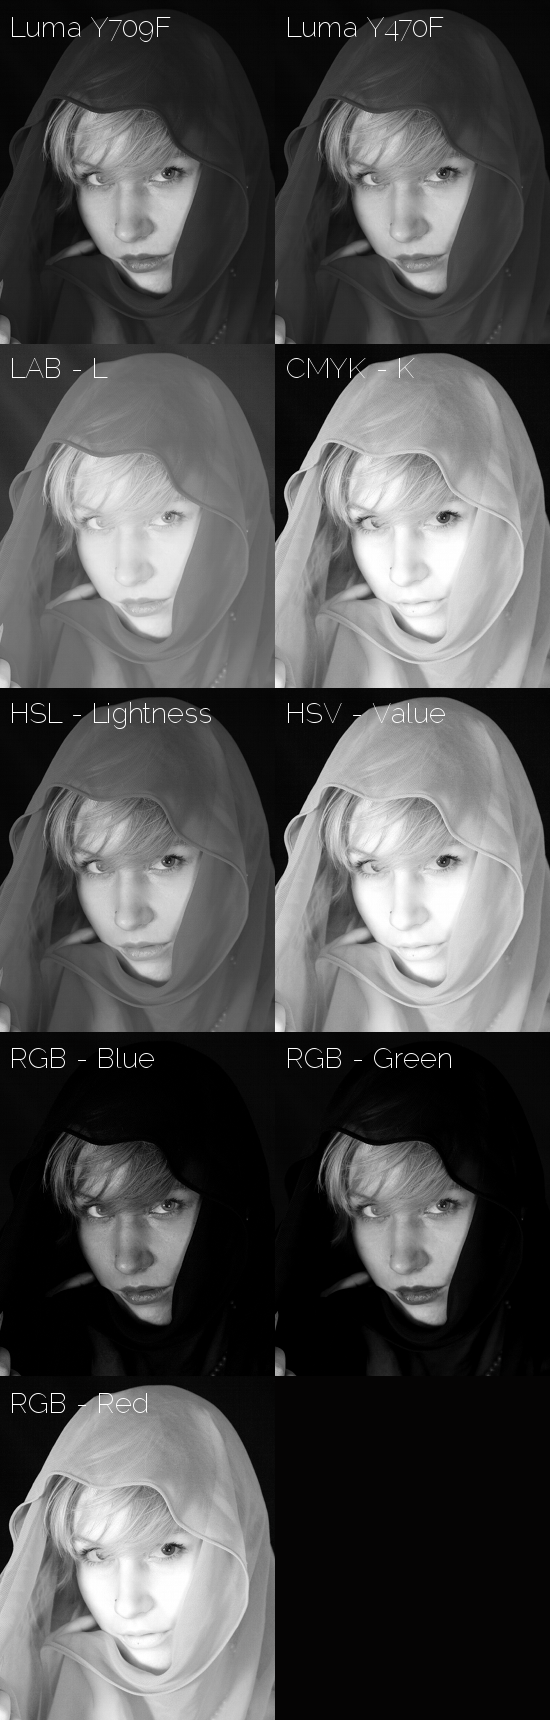 Grid of B&W converted images in GIMP using different color decompositions (grayscale).